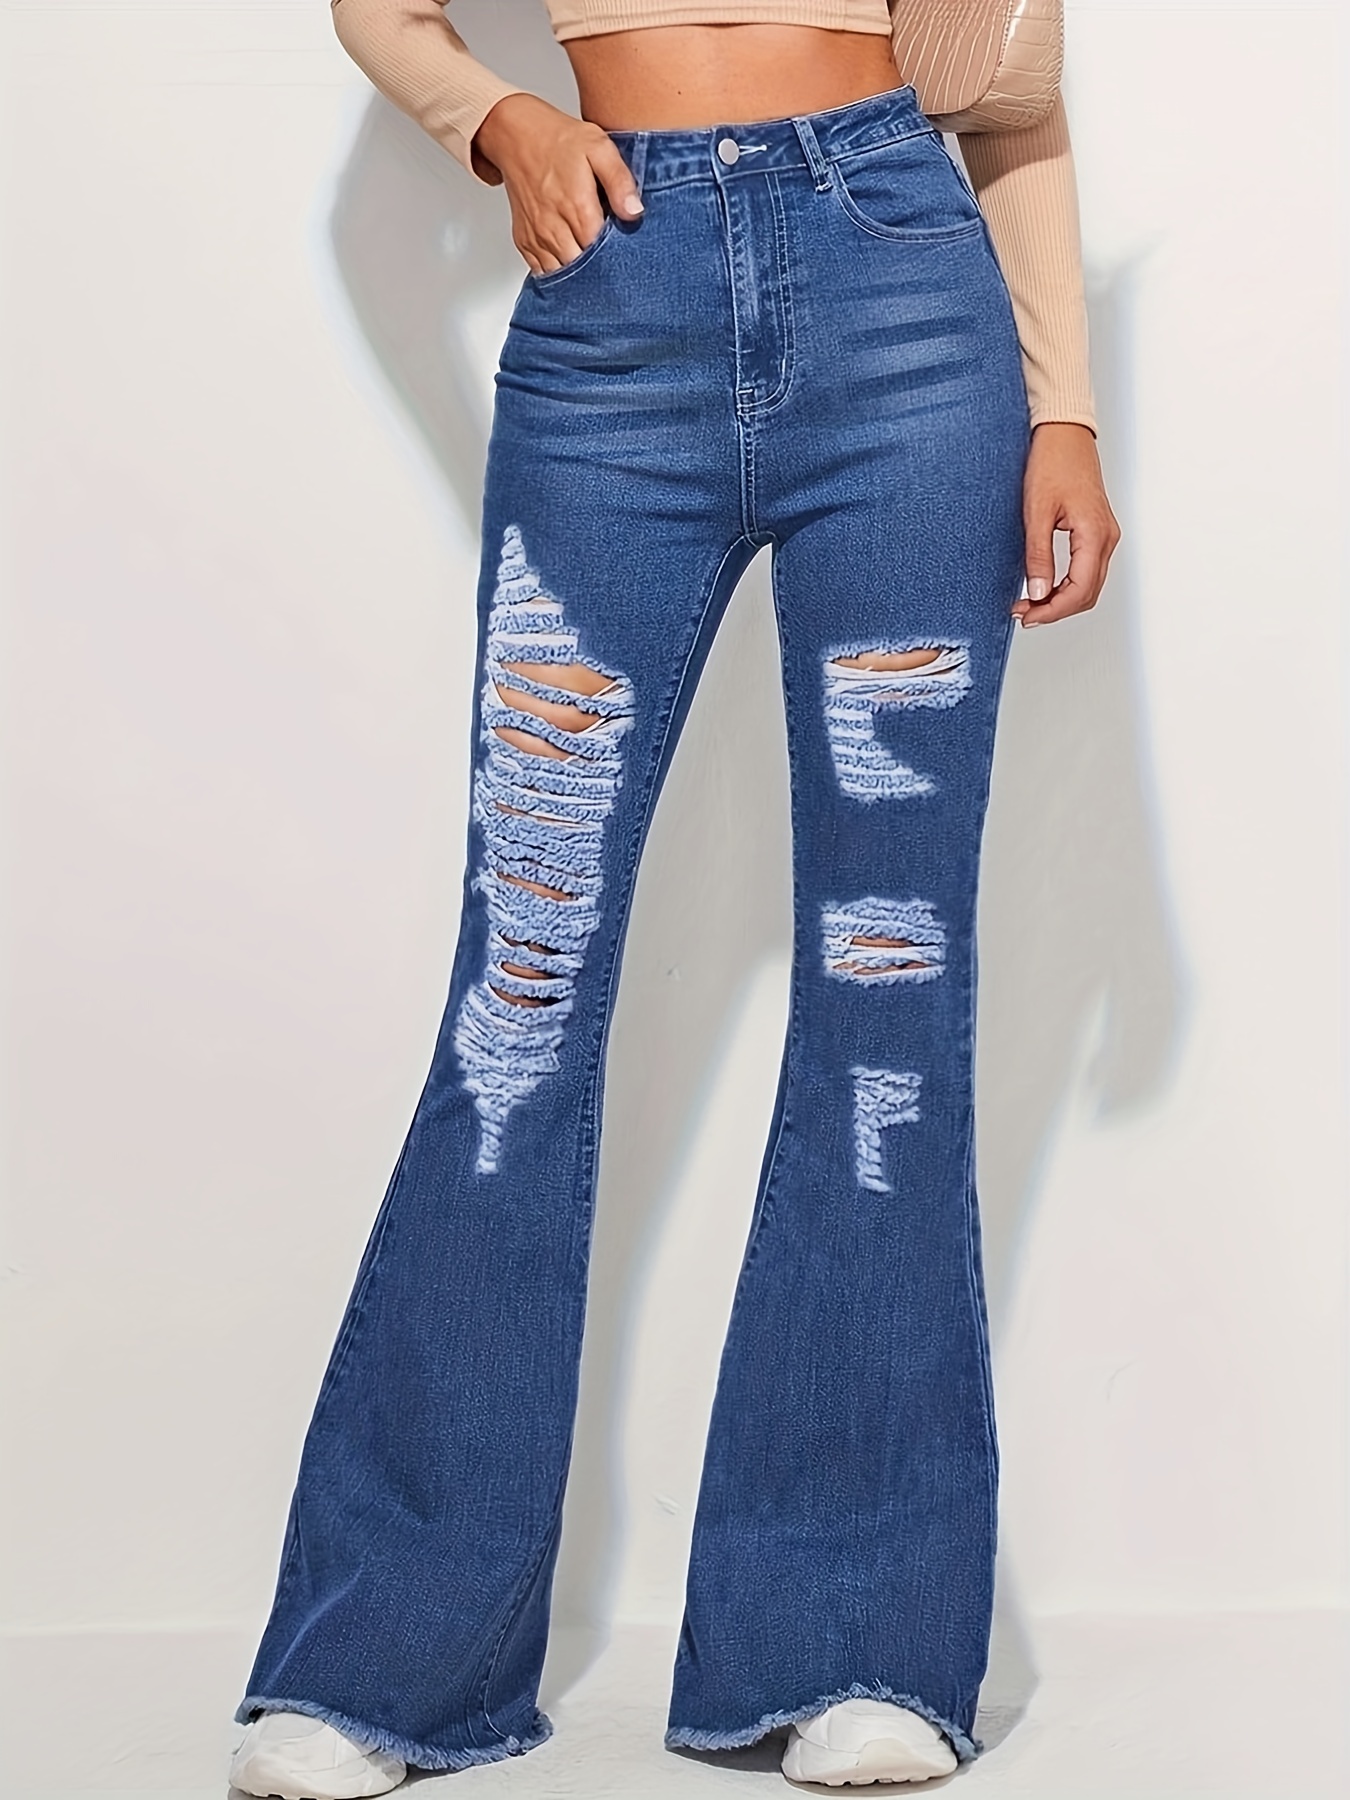 Vintage Flare Leg Ripped Jeans, Distressed High Rise Whiskering